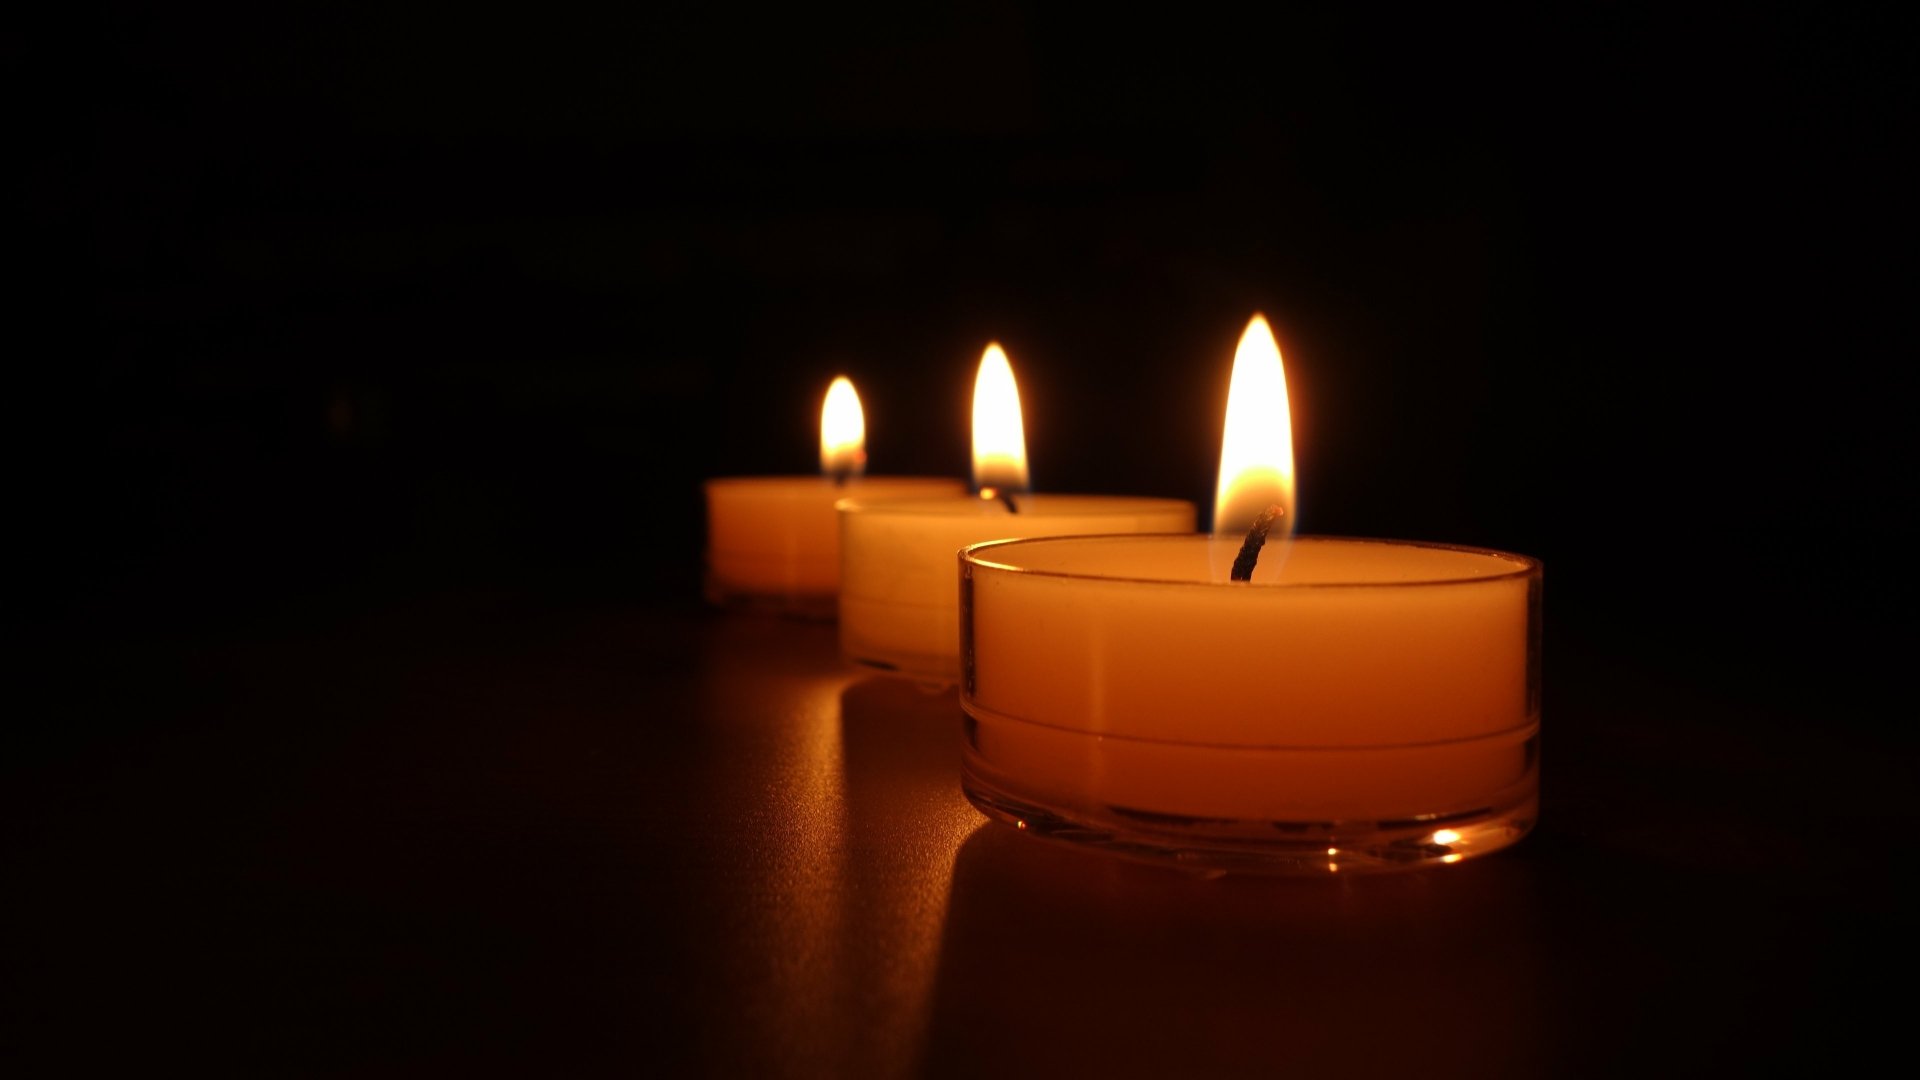 Free Candle Wallpaper Downloads 200 Candle Wallpapers for FREE   Wallpaperscom